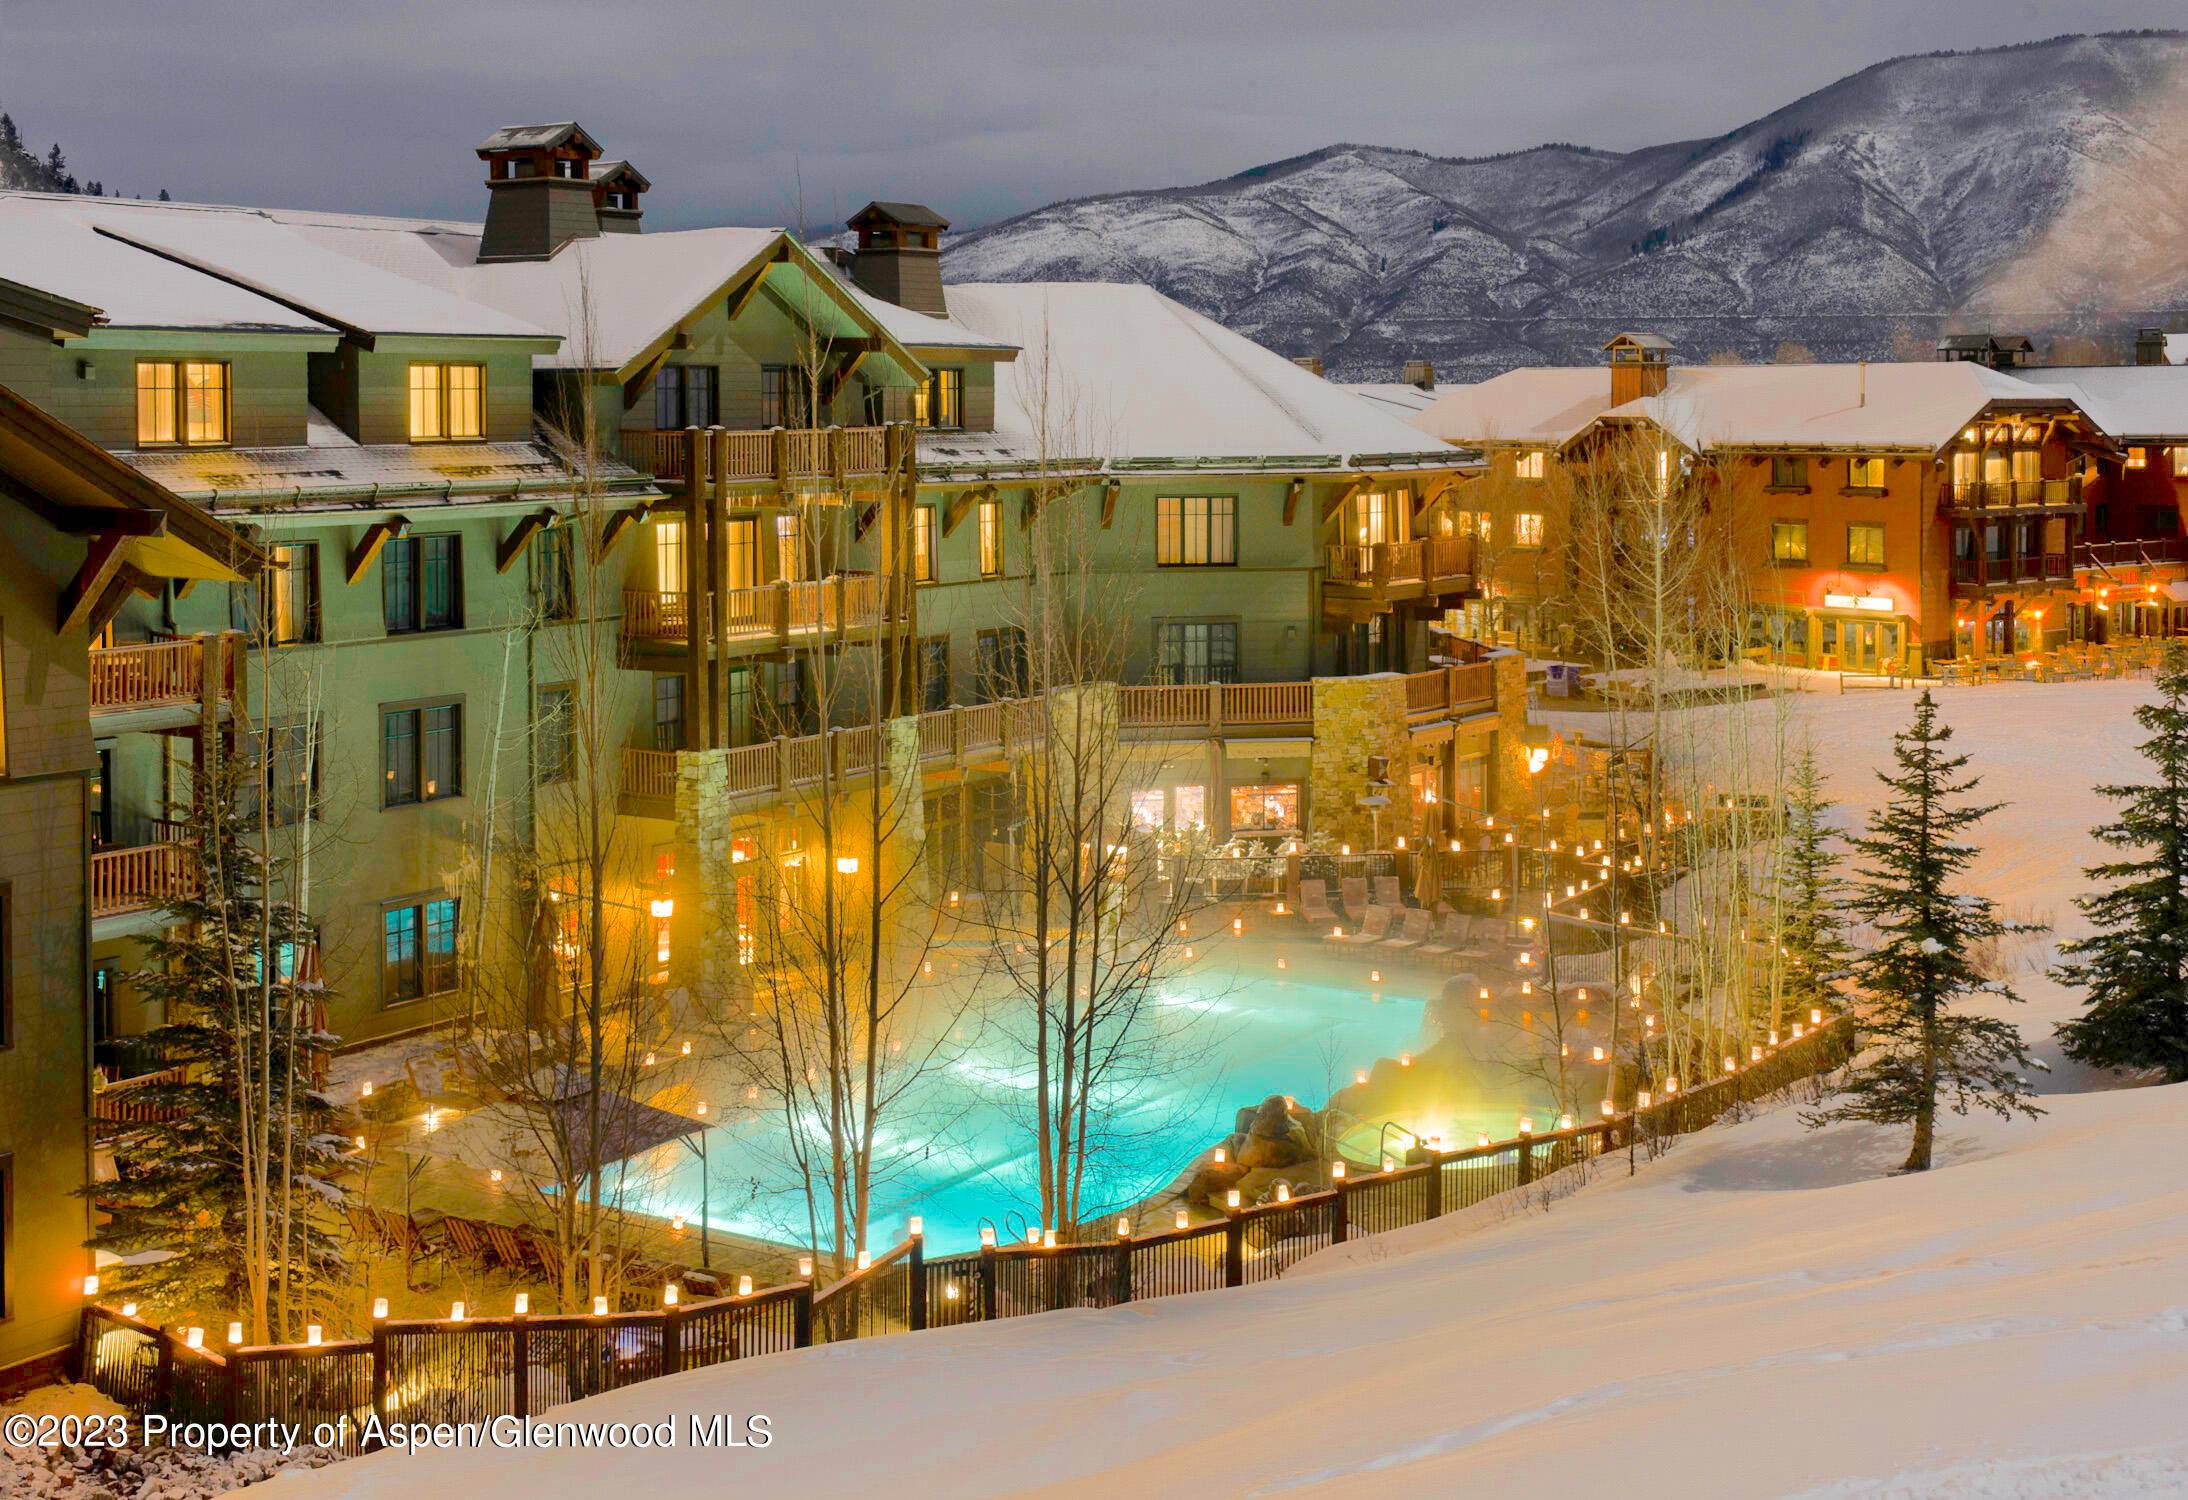 Enjoy NEW YEAERS THIS YEAR SLOPE SIDE at The Ritz Carlton Club Aspen Highlands, 3 bedroom SUMMER Membership.